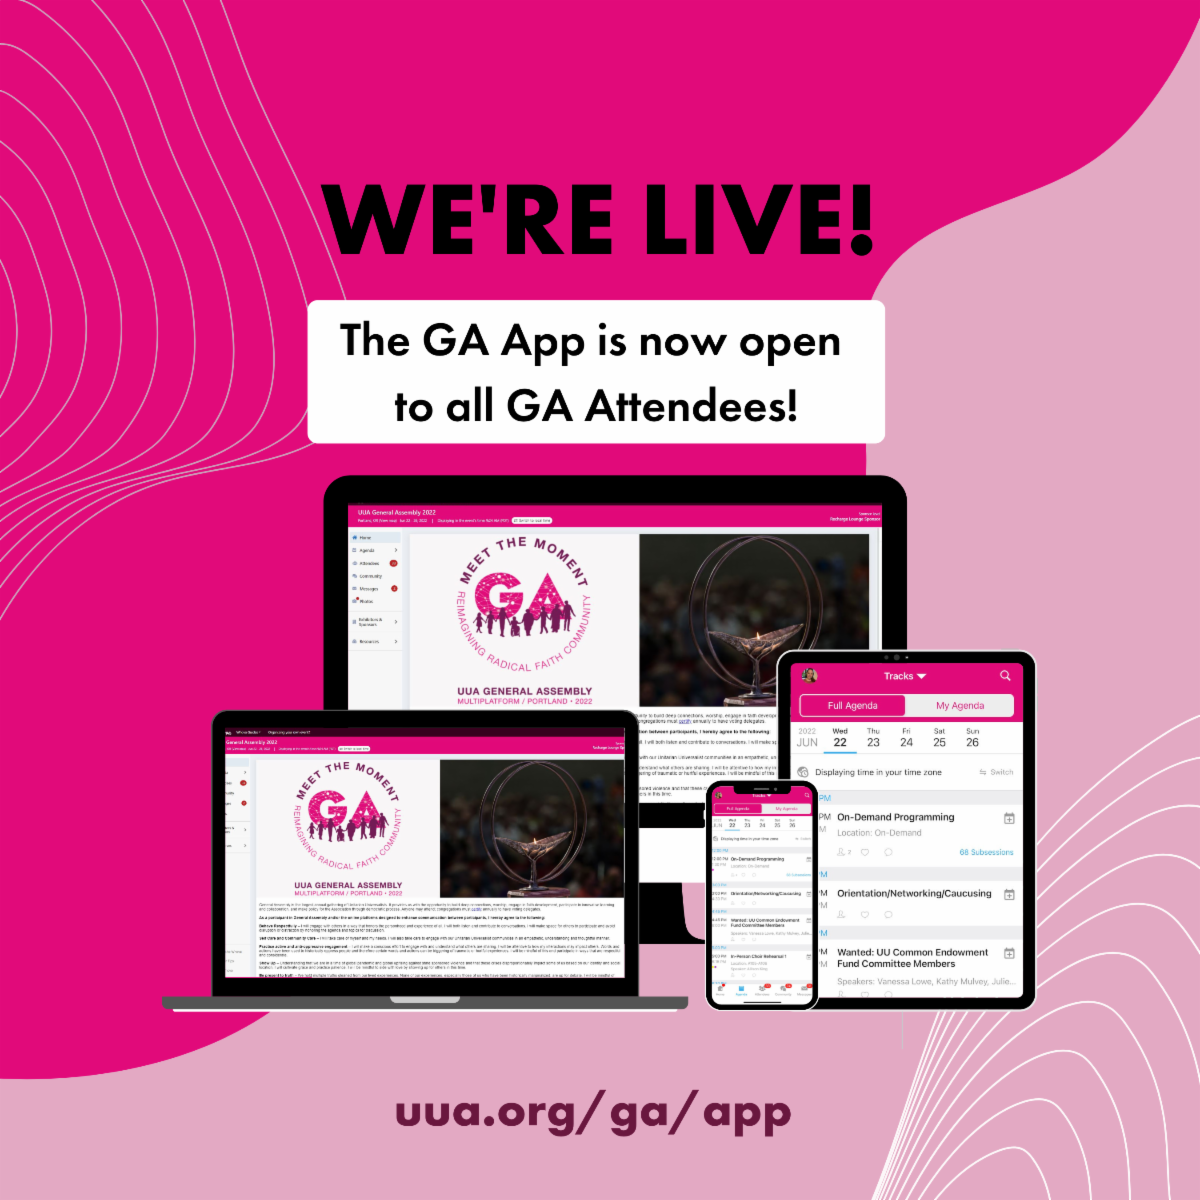 The GA app is now open to all GA attendees